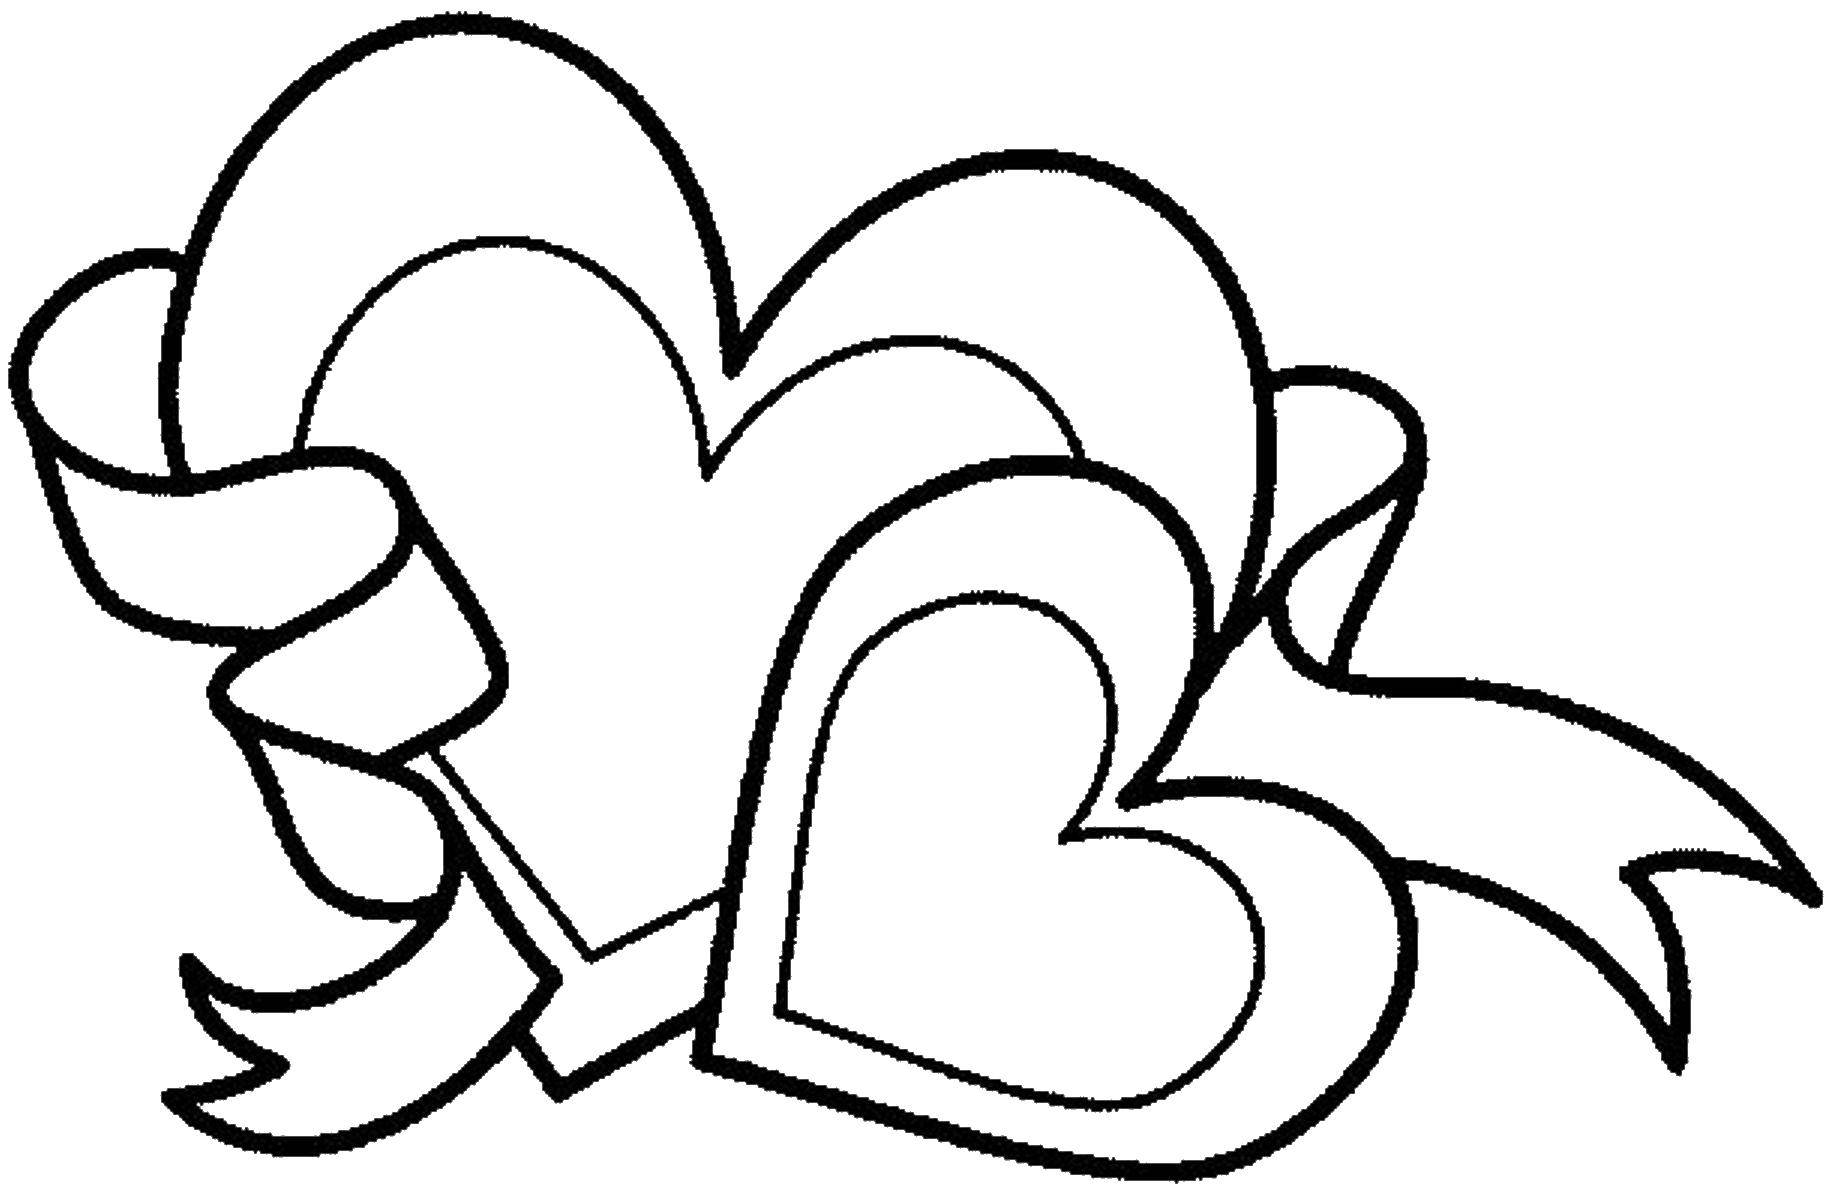 Coloring Cute hearts. Category Hearts. Tags:  Heart, love.